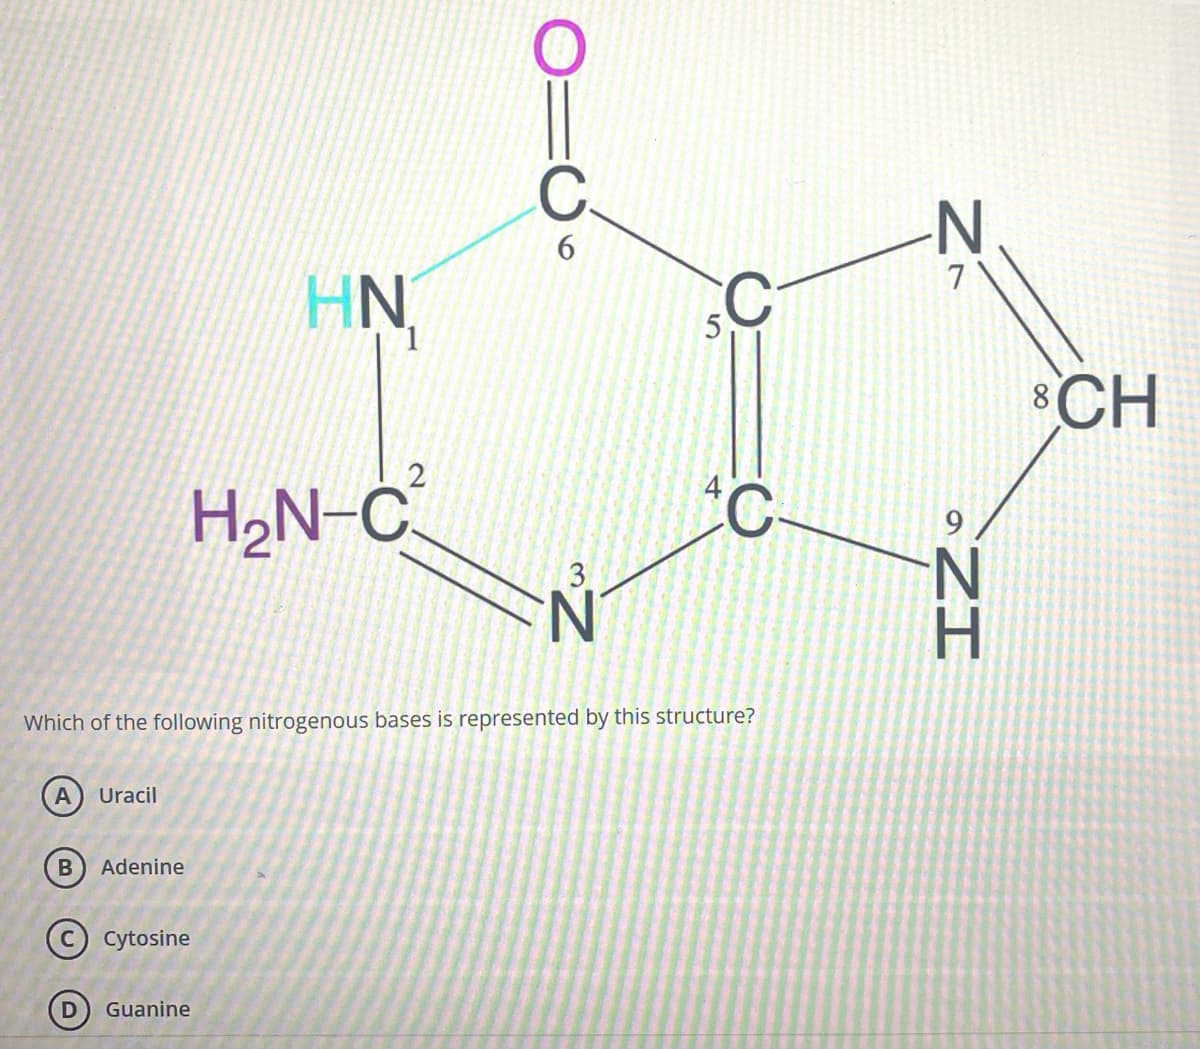 A Uracil
B Adenine
HN
Cytosine
Guanine
2
H₂N-C
6
3
N
Which of the following nitrogenous bases is represented by this structure?
5
C
C
N
7
IZⓇ
8 CH